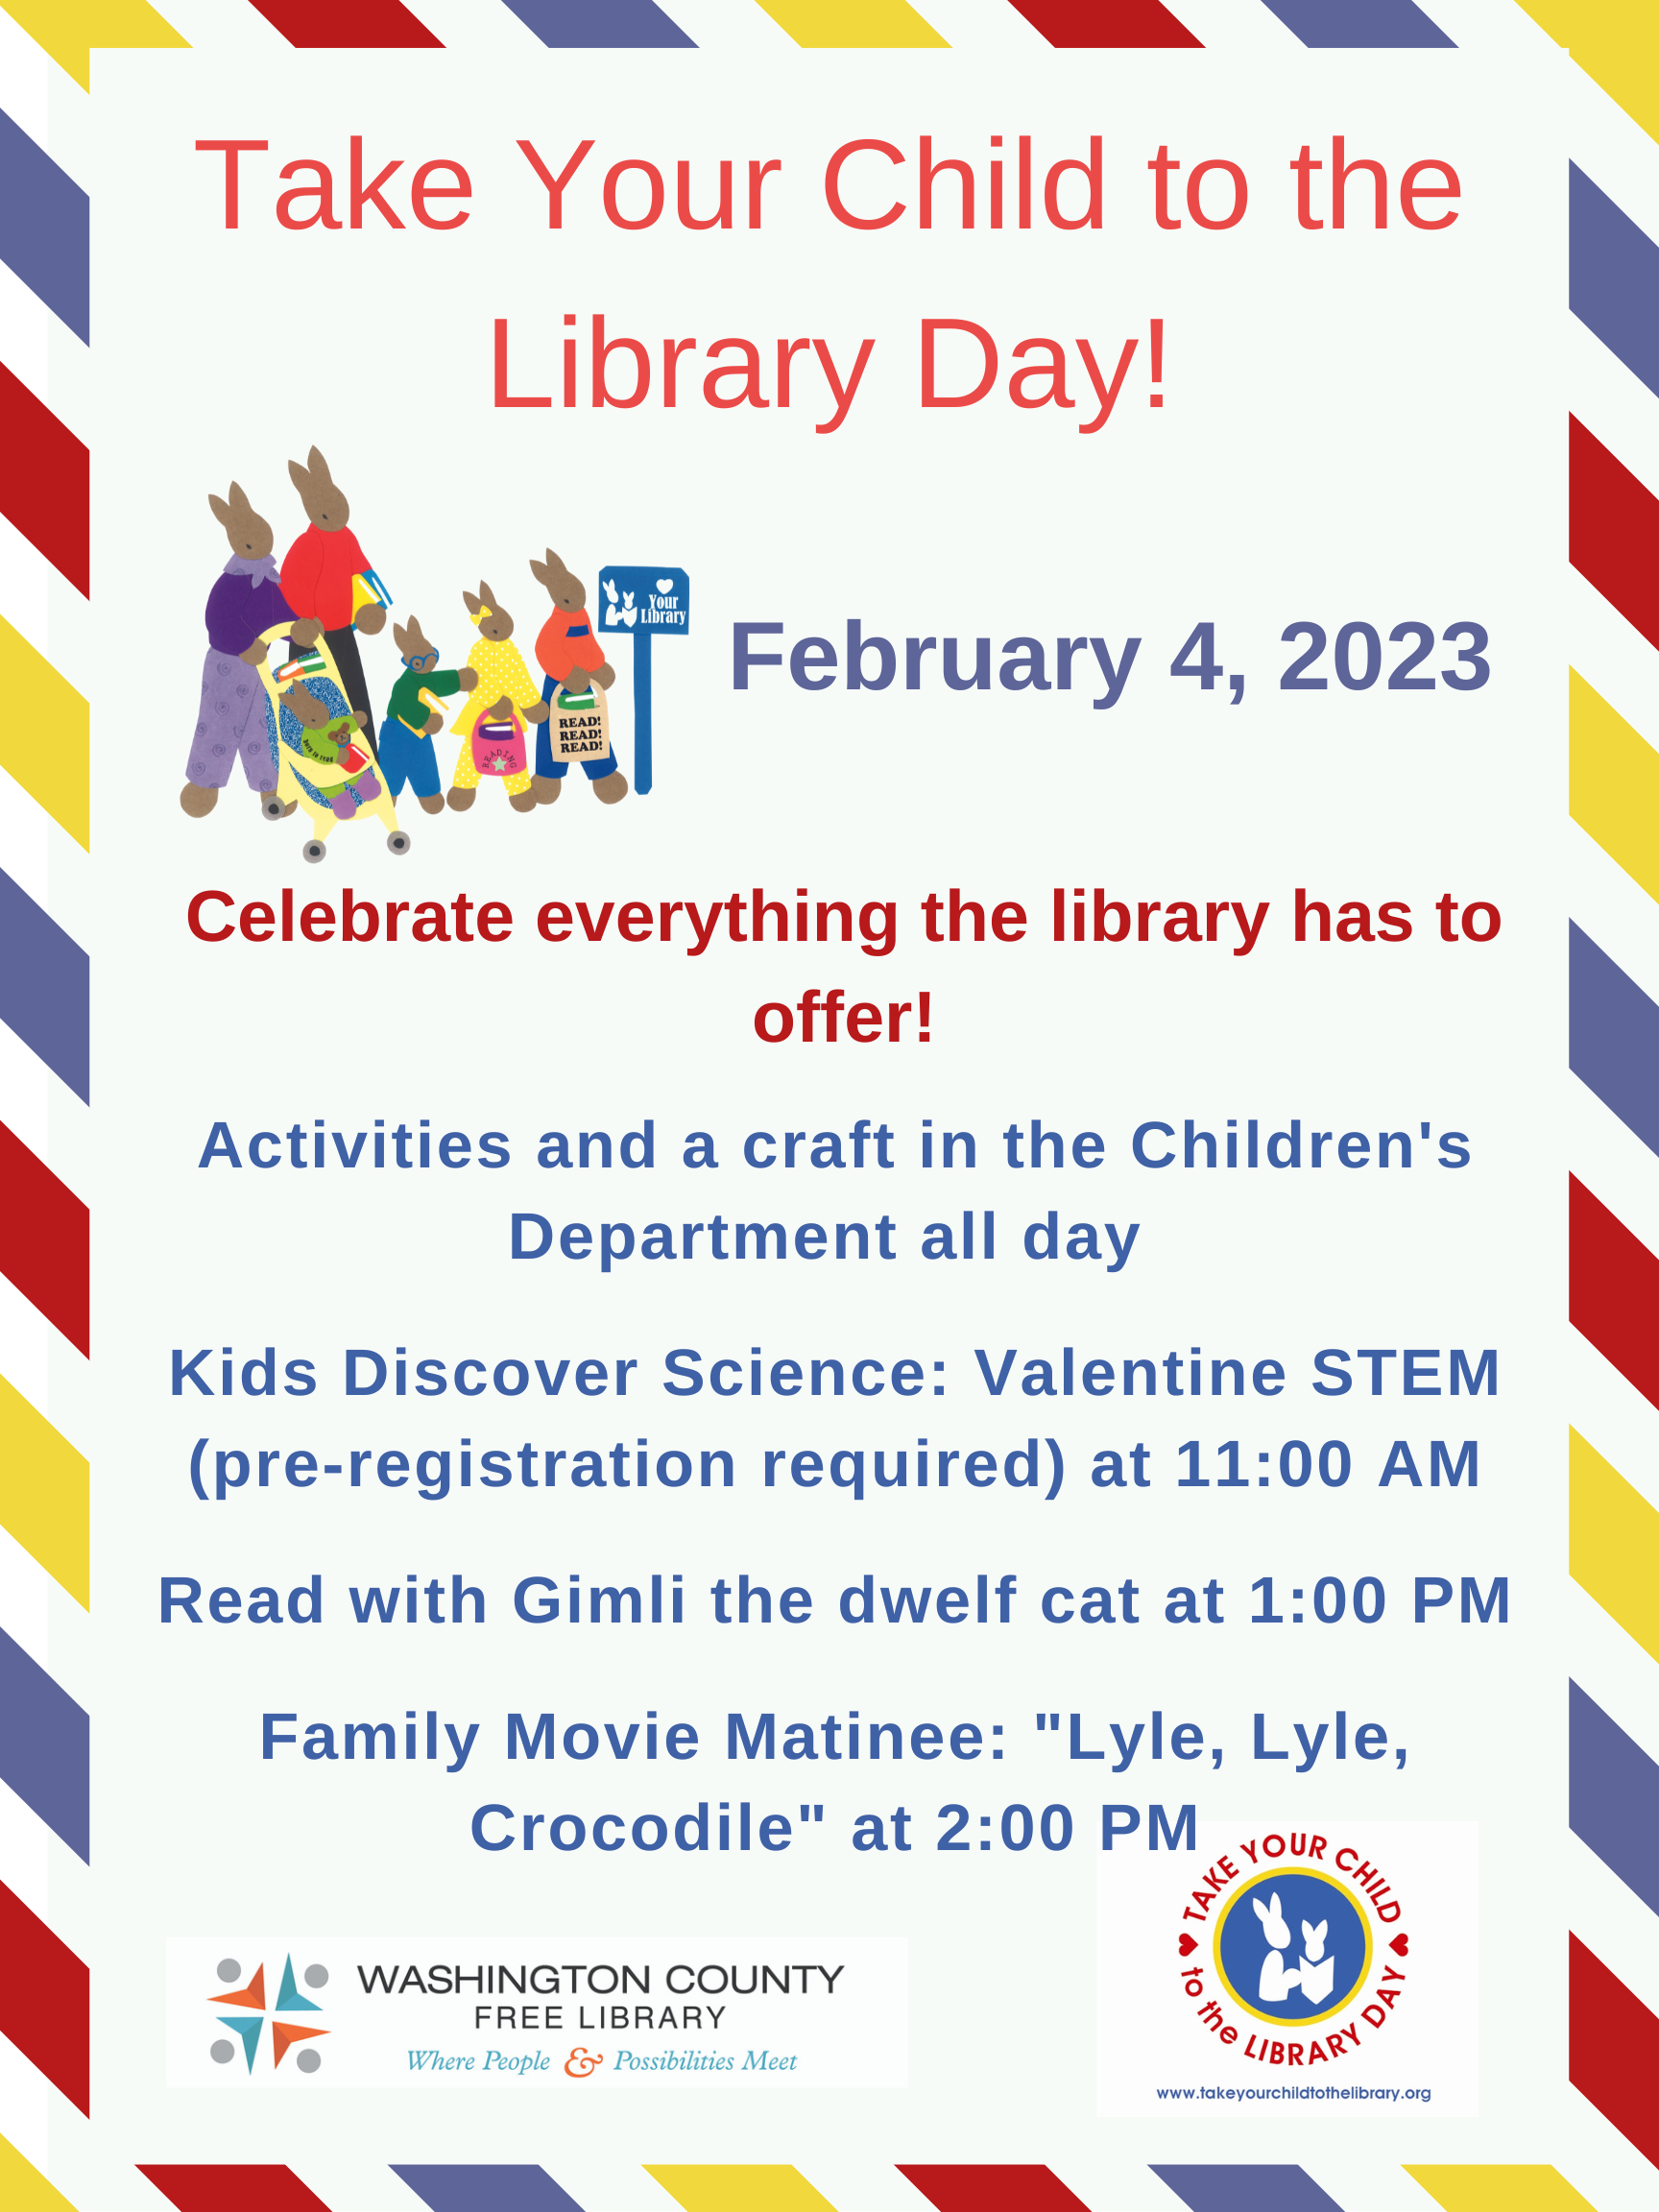 Take your child to the library poster